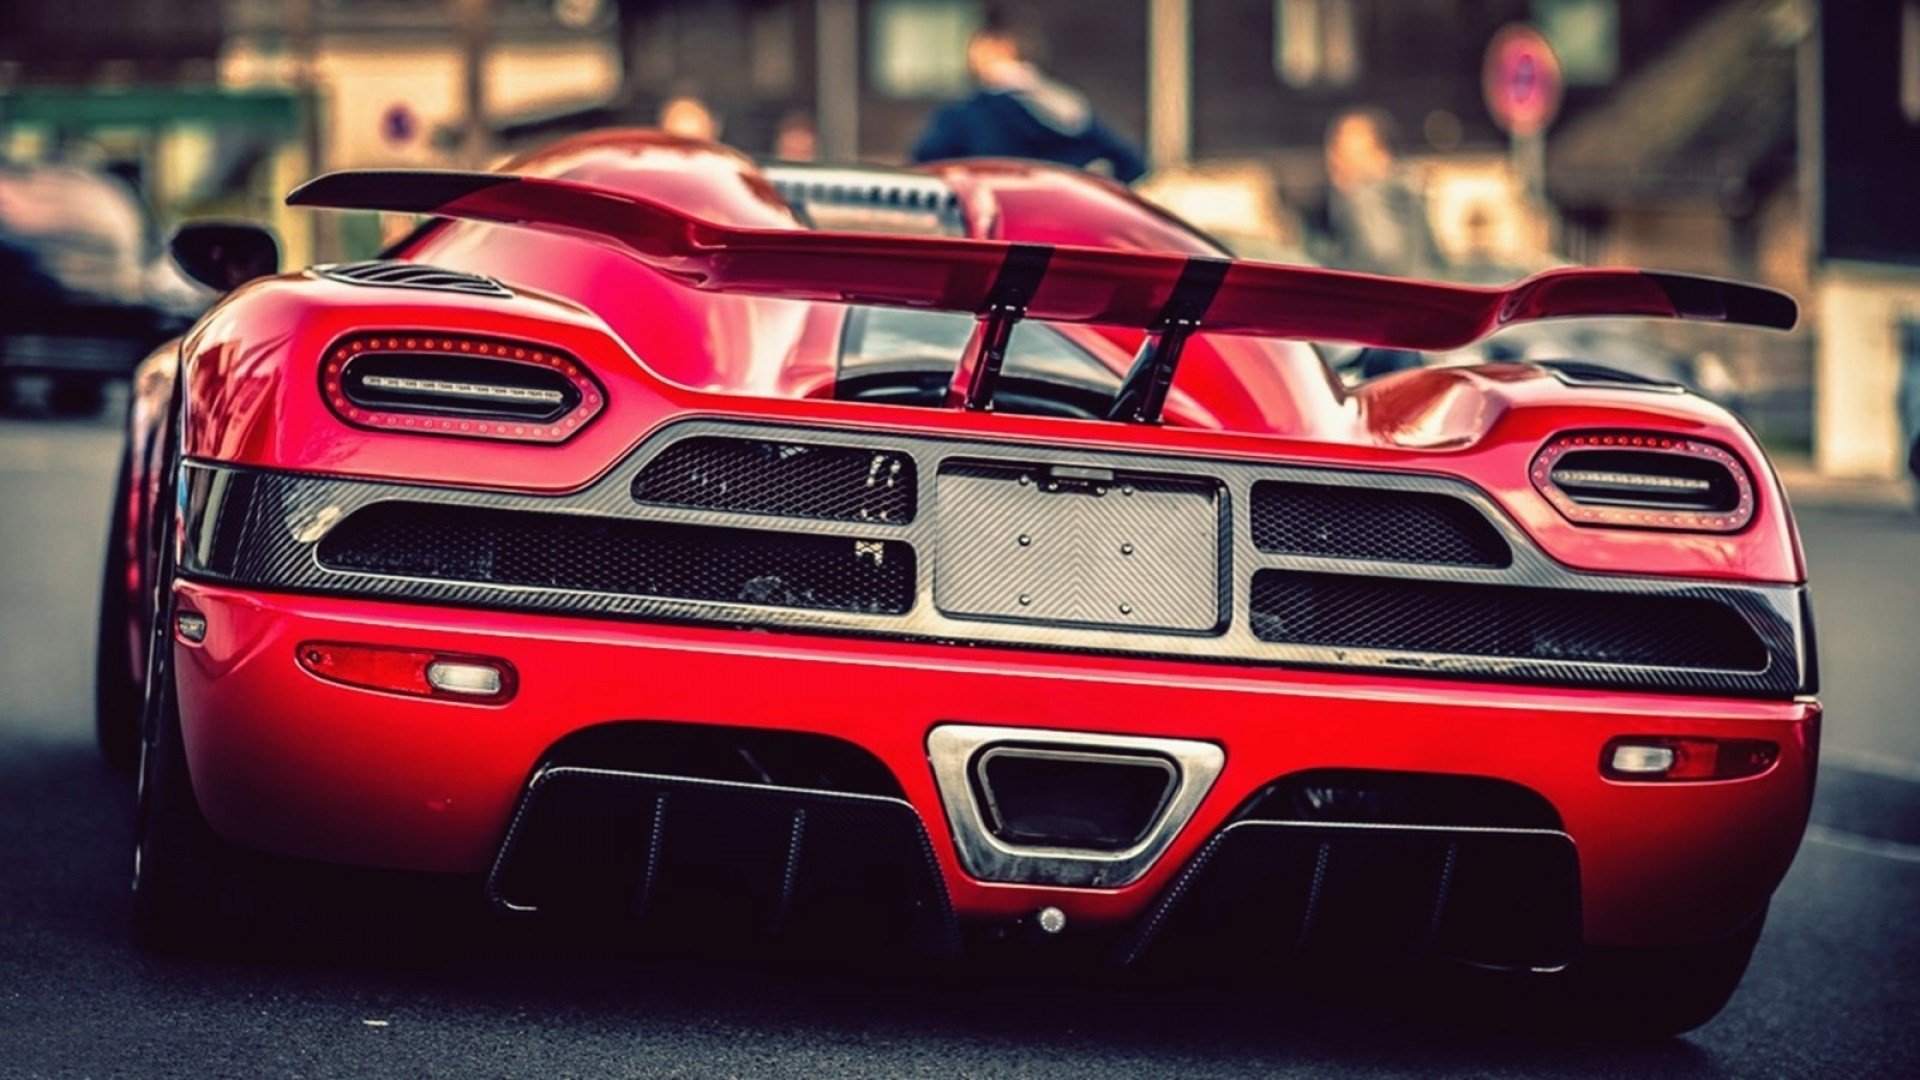 Koenigsegg Agera R Red And Black Wallpapers